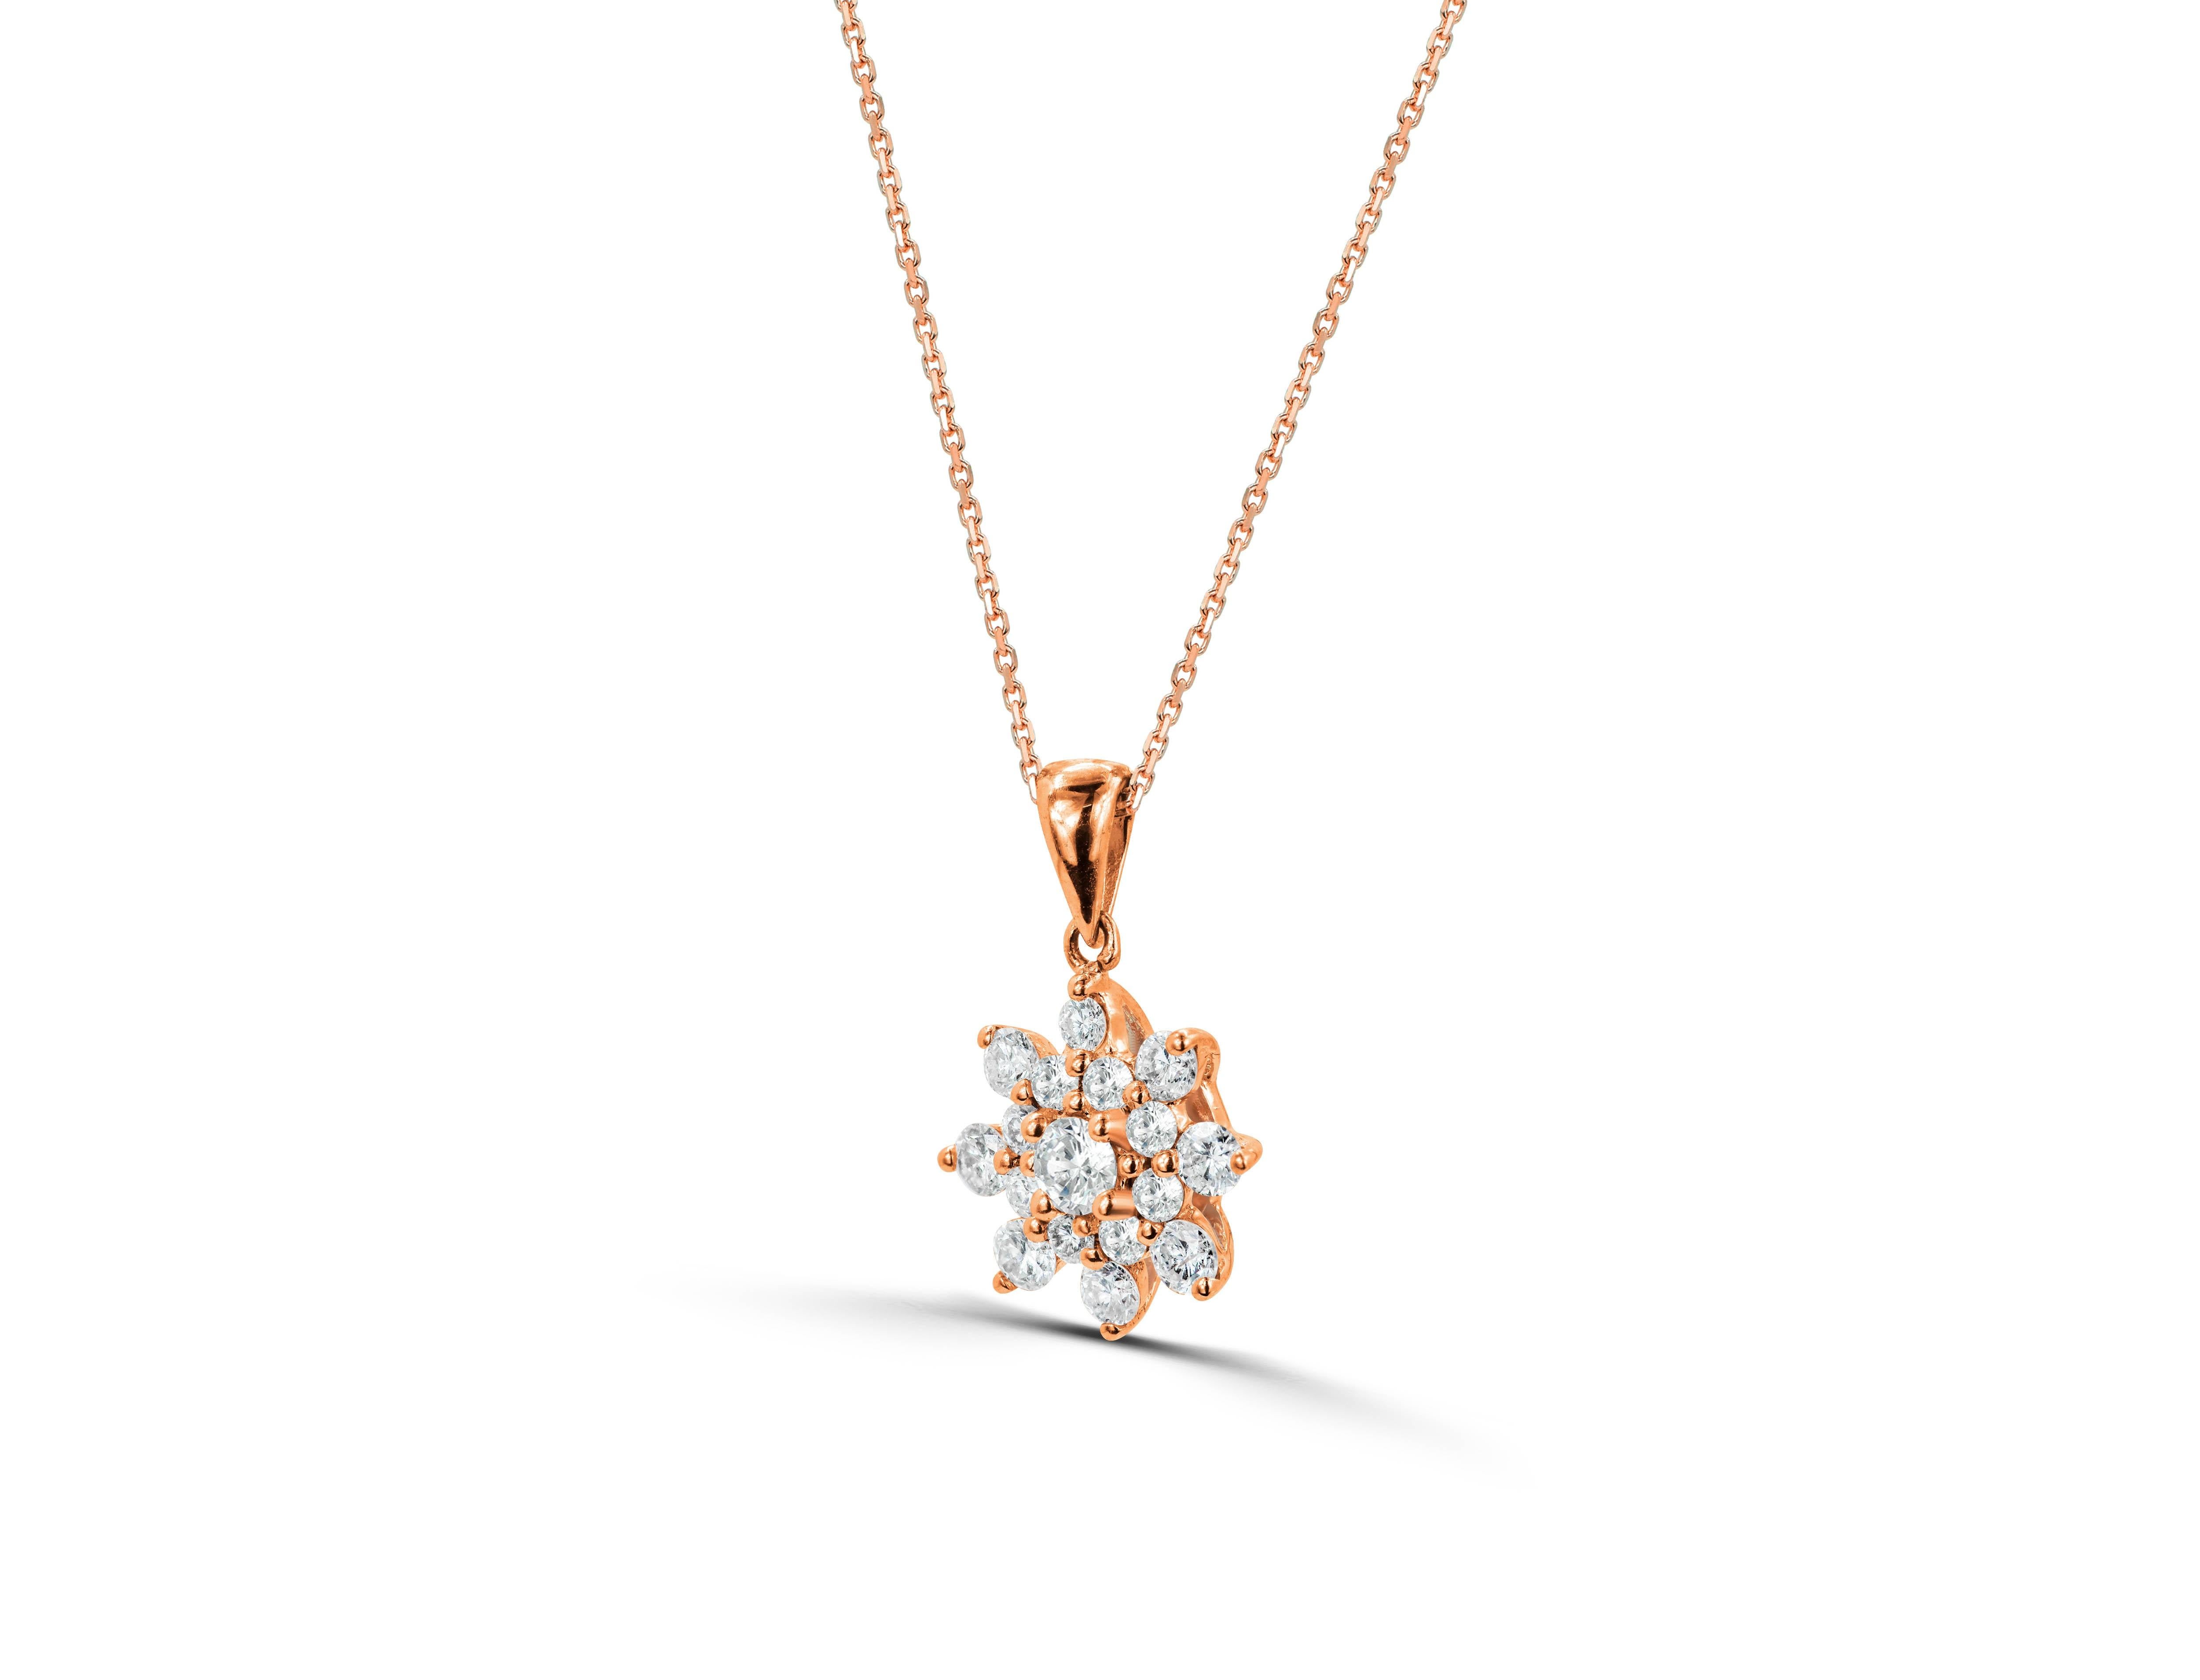 Diamond cluster necklace, Flower cluster necklace, Minimalist necklace, Everyday diamond necklace, beautiful diamond necklace, 14k gold

diamond Flower, Bridal necklace, wedding necklace, diamond pendant, bridesmaid necklace, Wedding jewelry set,